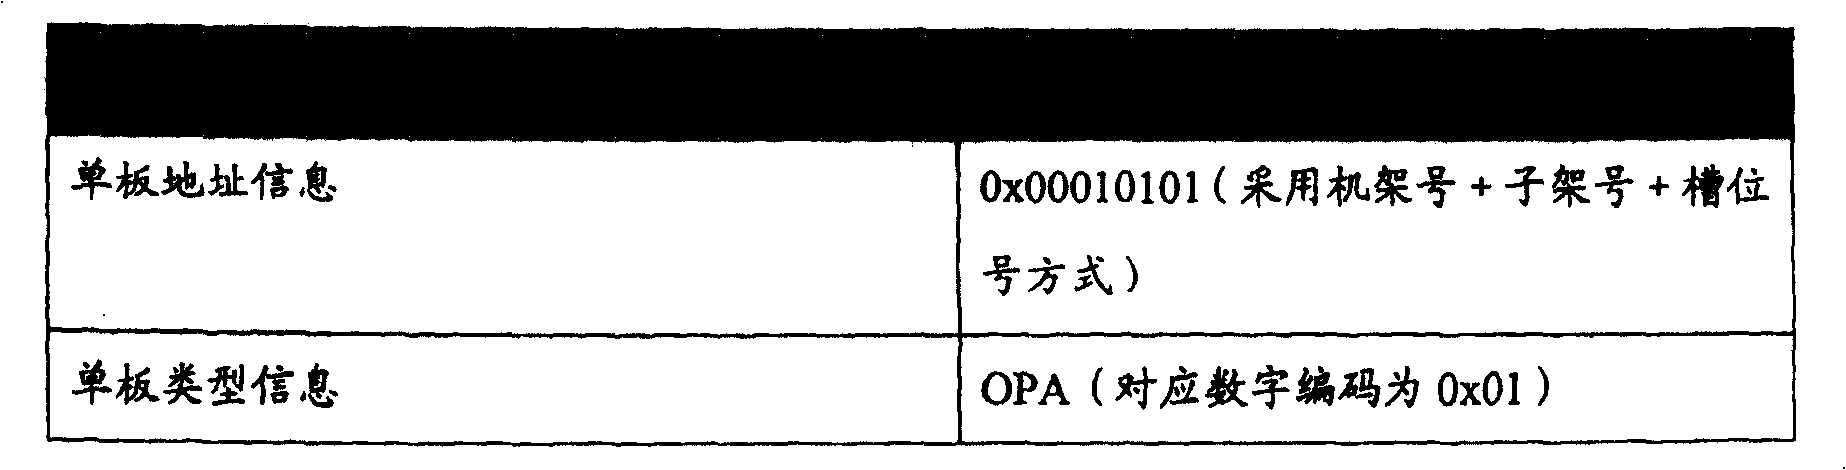 A method to automatically obtain inner connection relation of optical network node